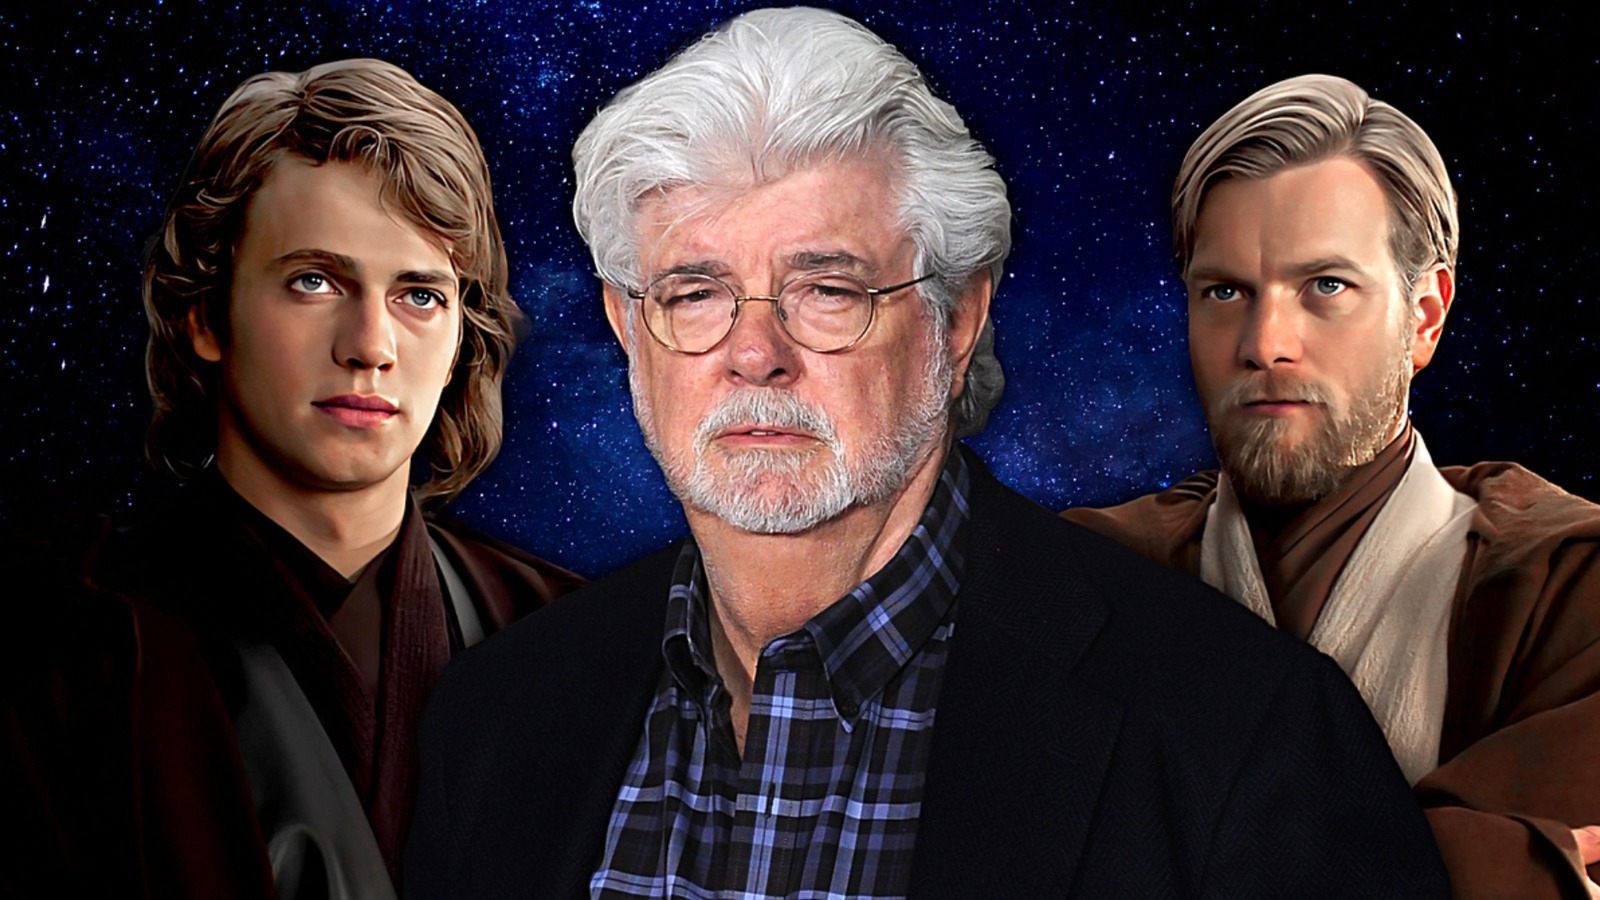 Why George Lucas Abruptly Ended Star Wars Films Post Revenge Of The Sith – Here’s the Real Reason!